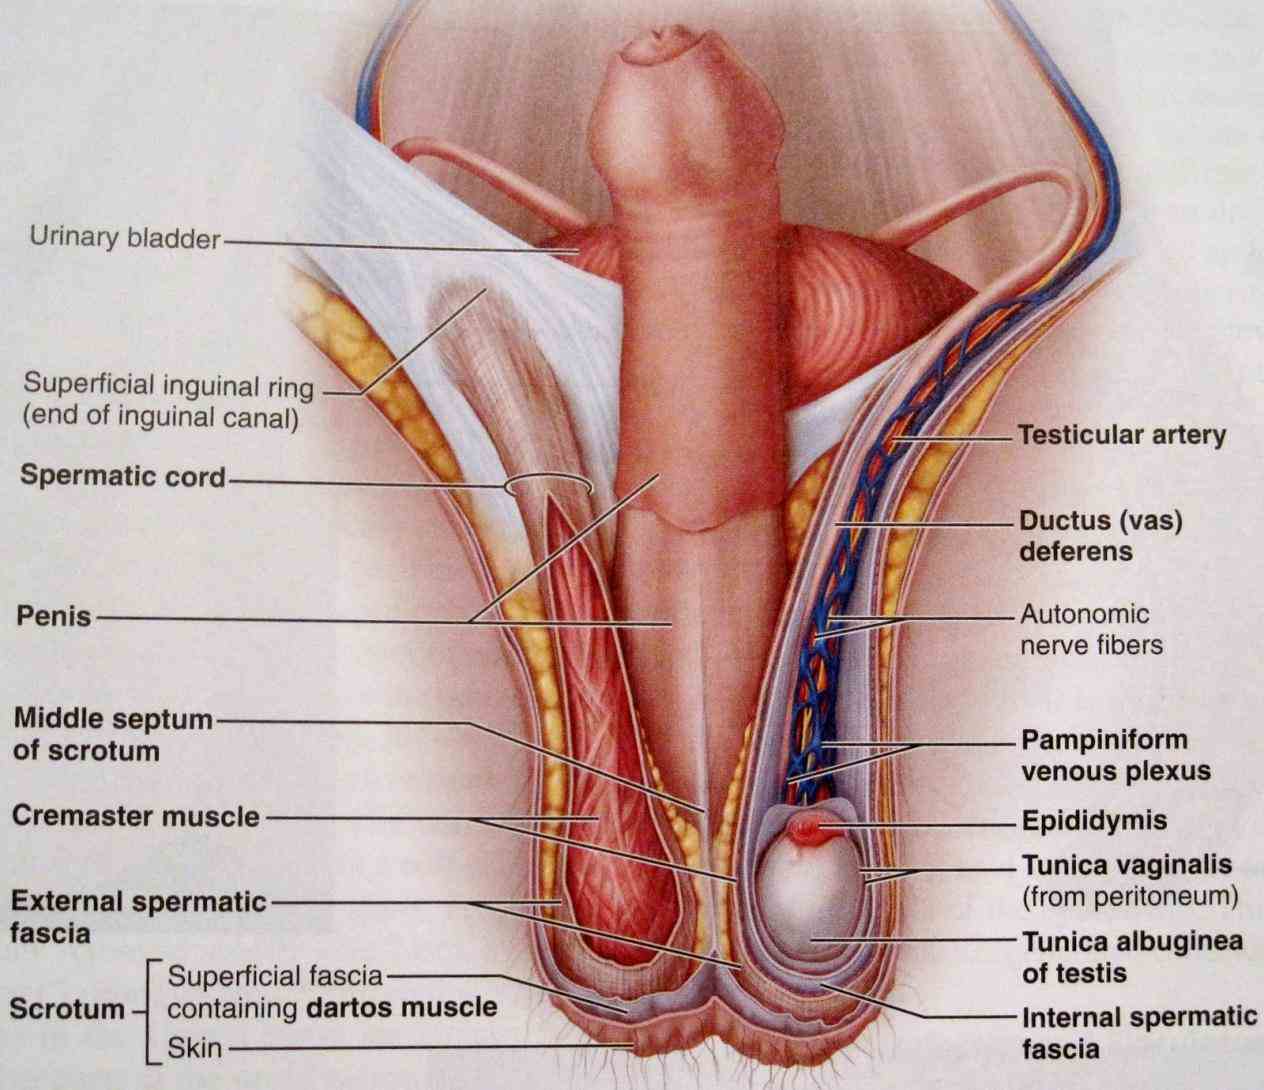 anatomy of female reproductive organs by amrit kaur introduction • the organ in are those which  related Anatomy Of